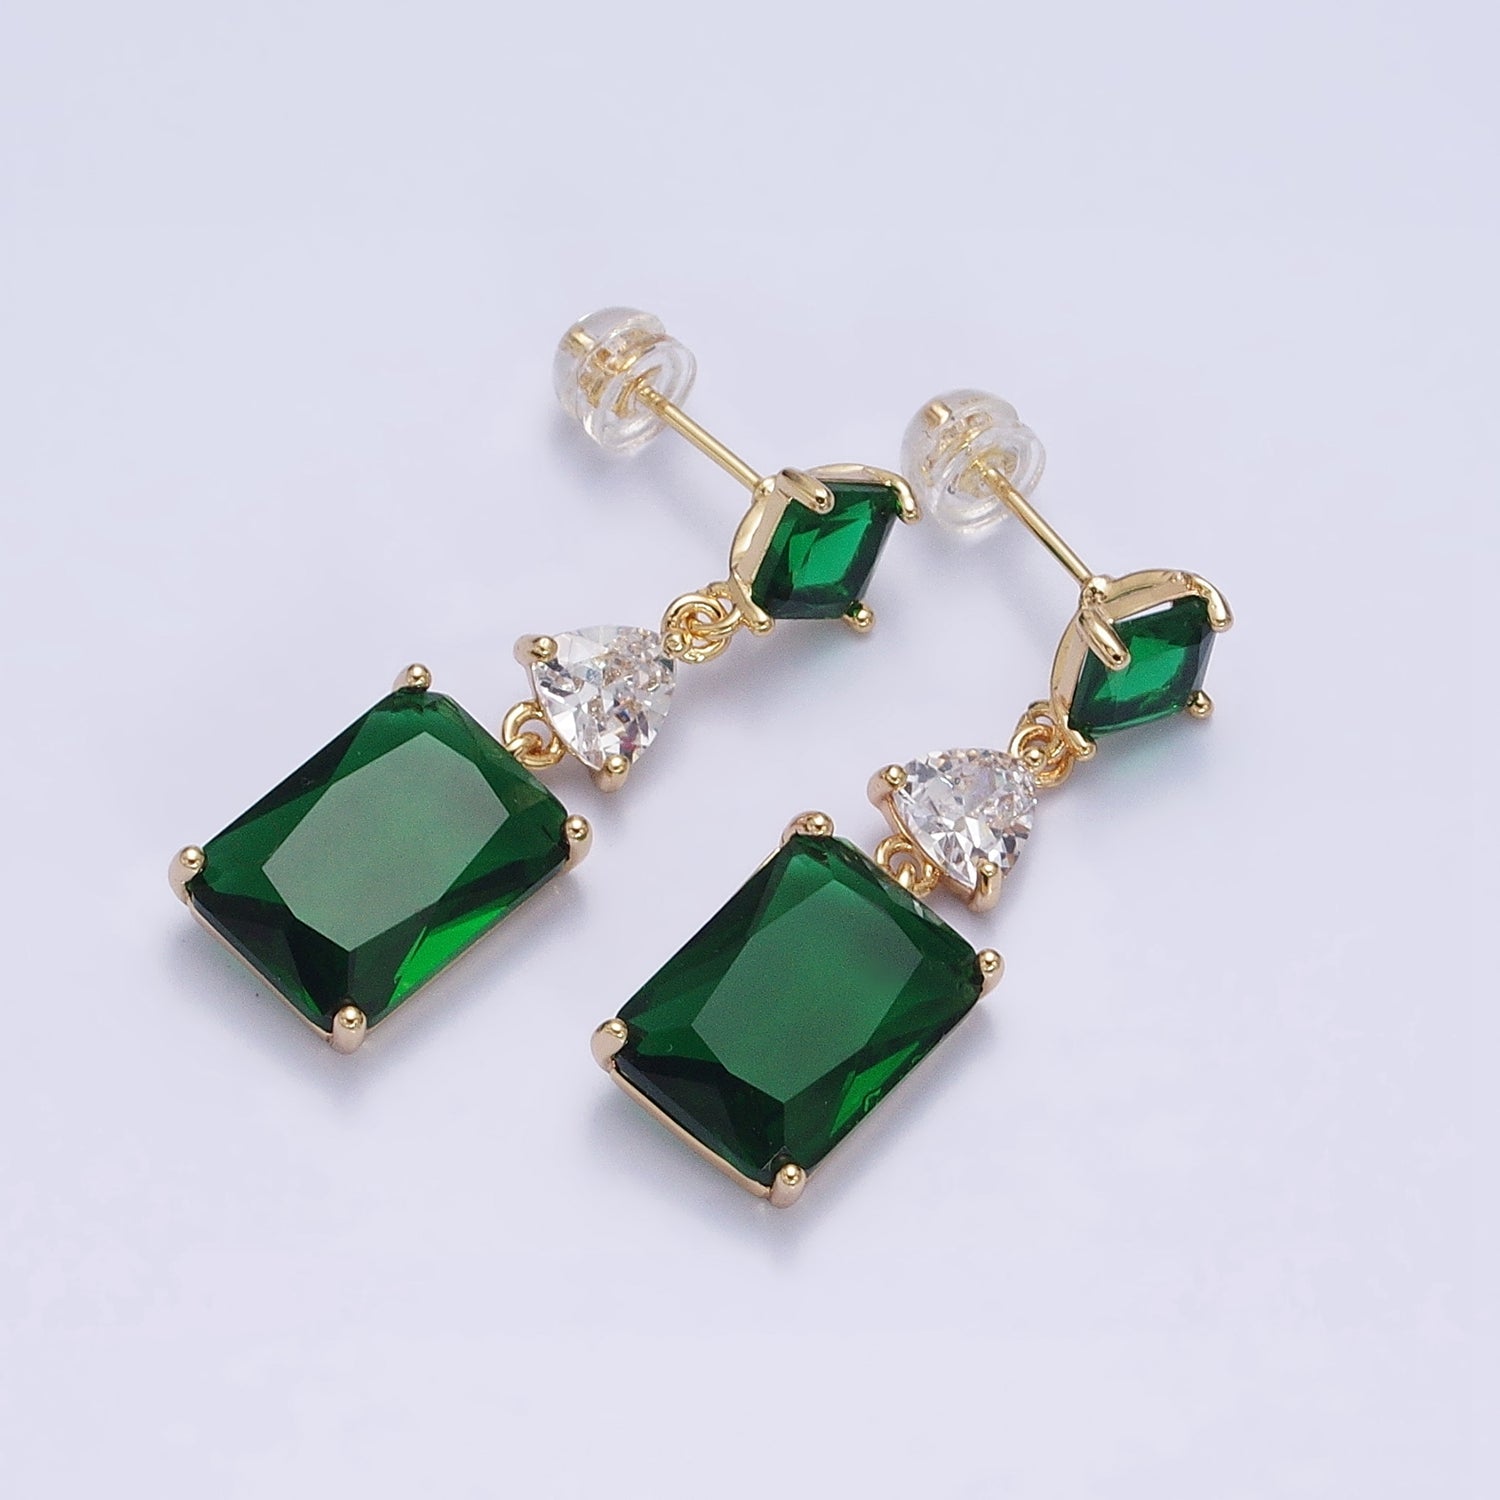 Gold Stud Earring with Drop Rectangle Colorful Cubic Zirconia Stone in Silver, Gold Earring AB690 - AB701 - DLUXCA